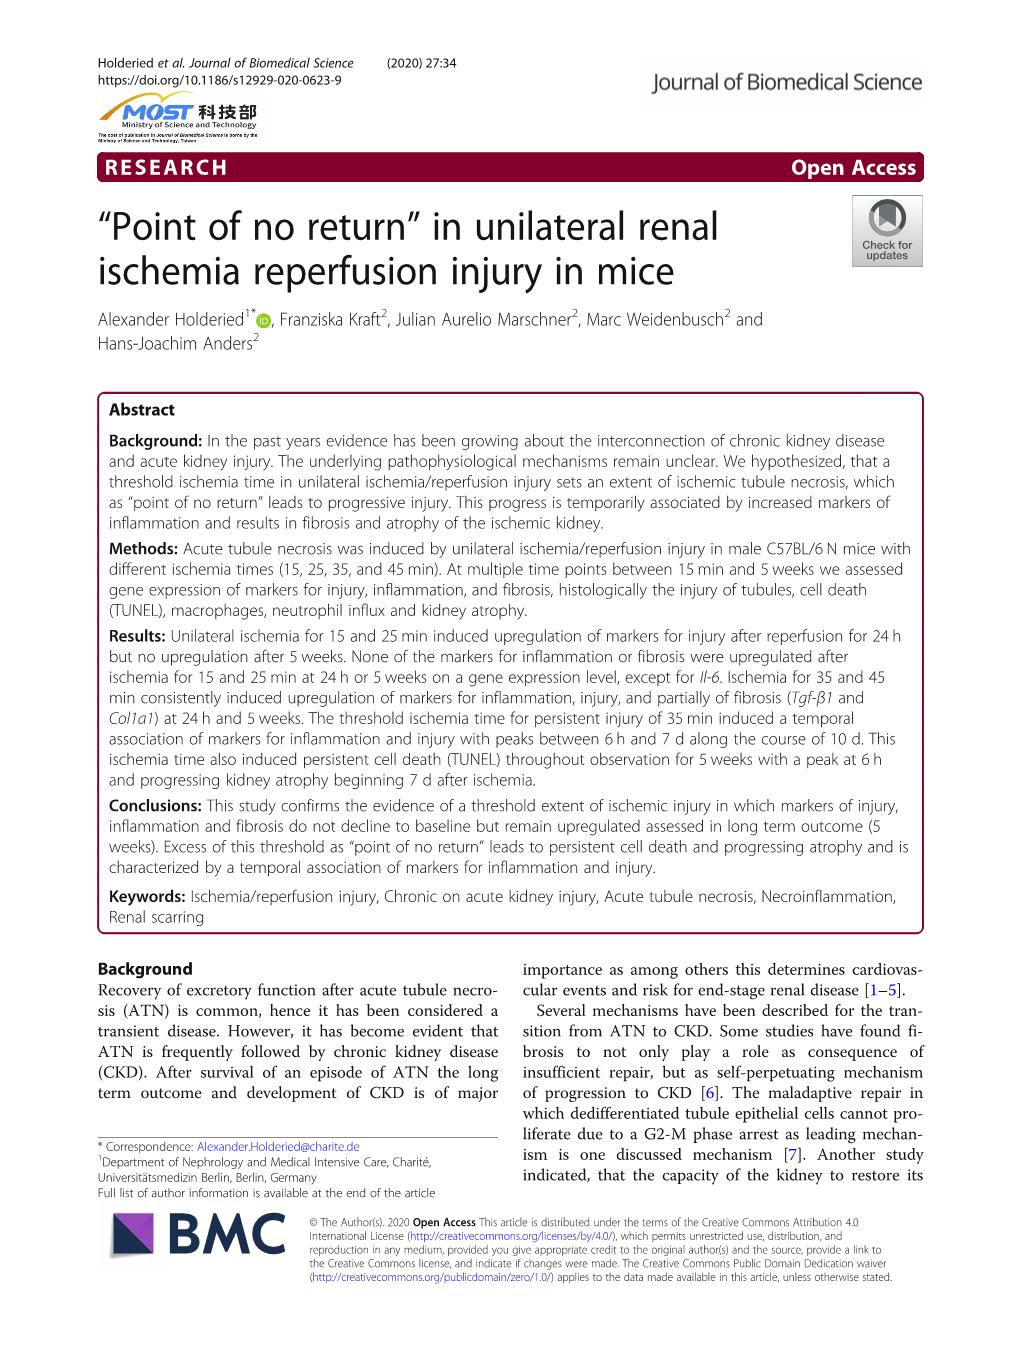 “Point of No Return” in Unilateral Renal Ischemia Reperfusion Injury in Mice